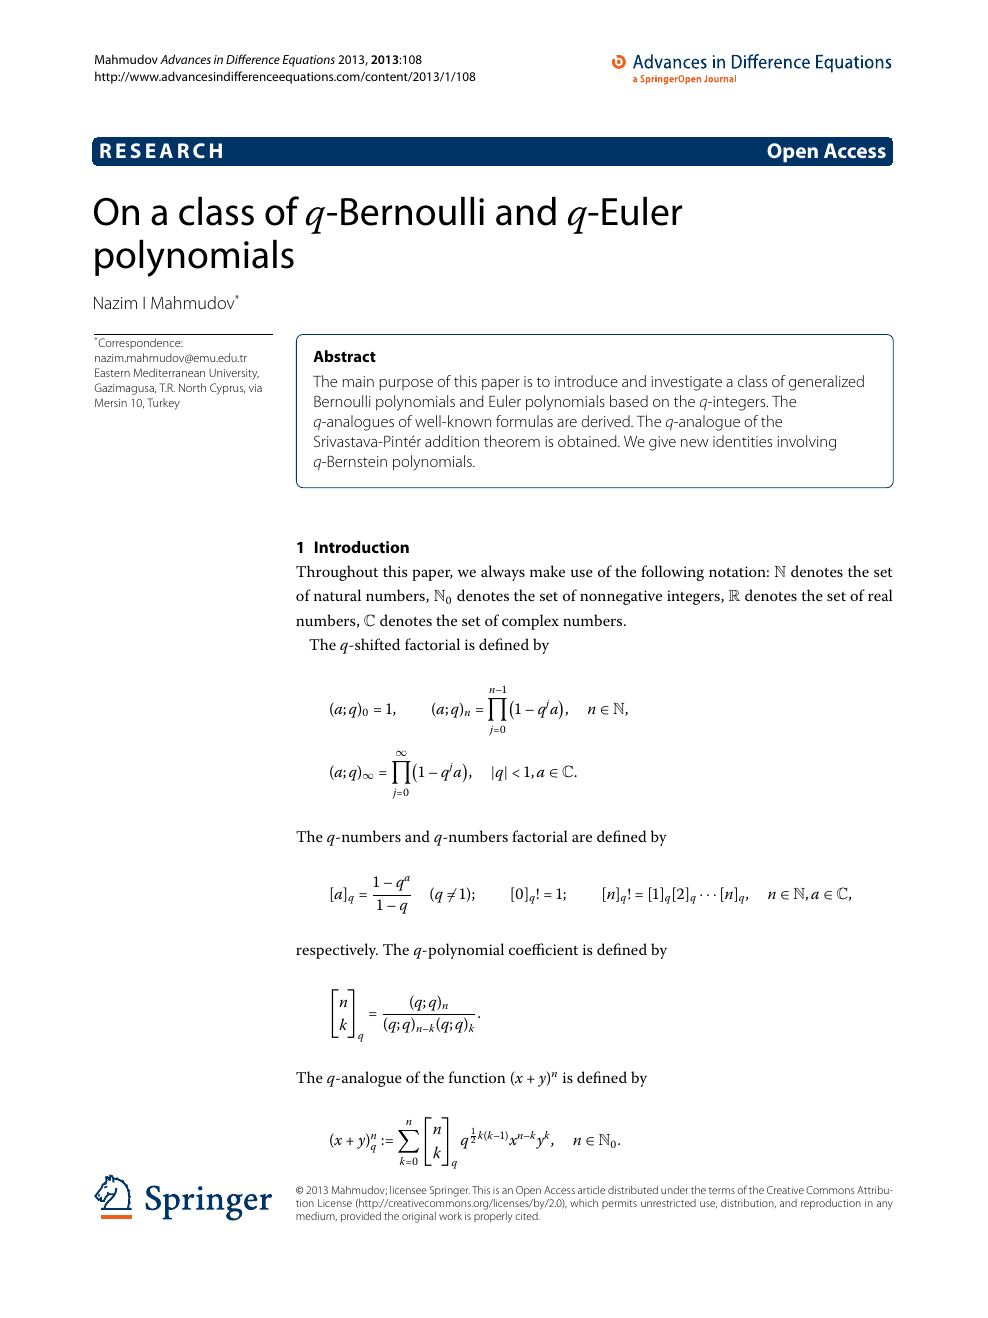 On A Class Of Q Bernoulli And Q Euler Polynomials Topic Of Research Paper In Mathematics Download Scholarly Article Pdf And Read For Free On Cyberleninka Open Science Hub